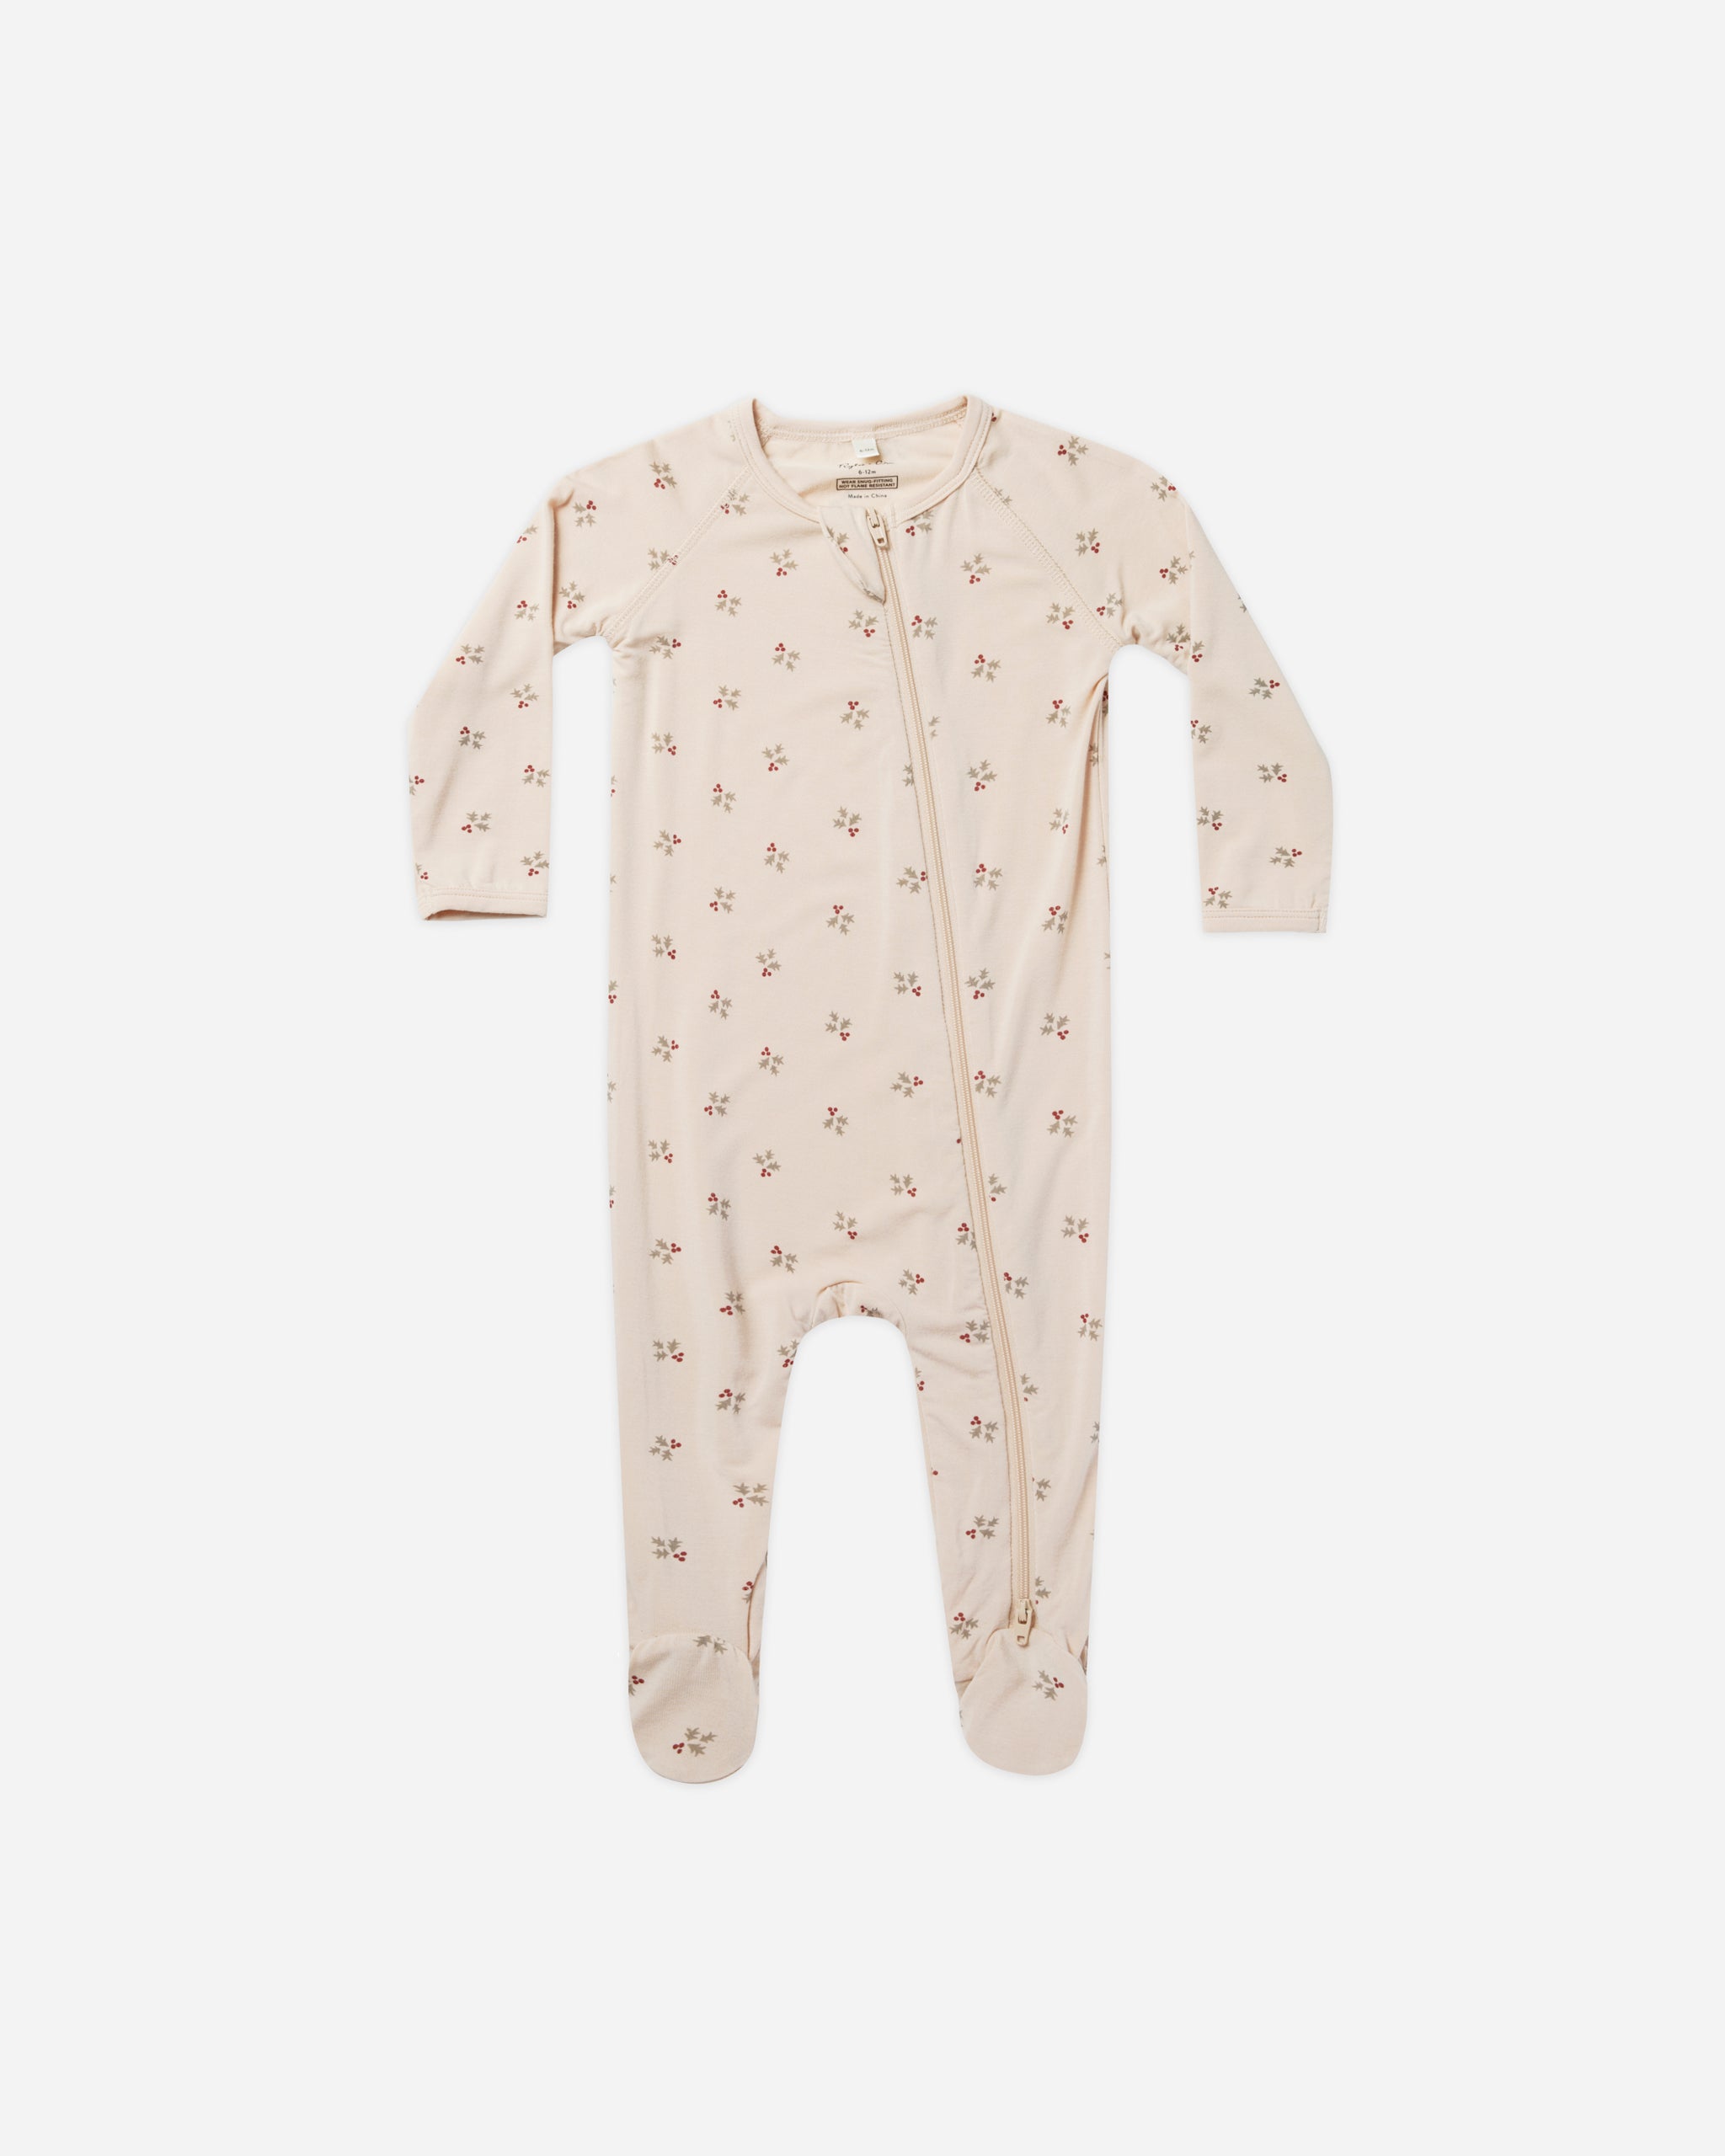 Modal Footie || Holly Berry - Rylee + Cru | Kids Clothes | Trendy Baby Clothes | Modern Infant Outfits |